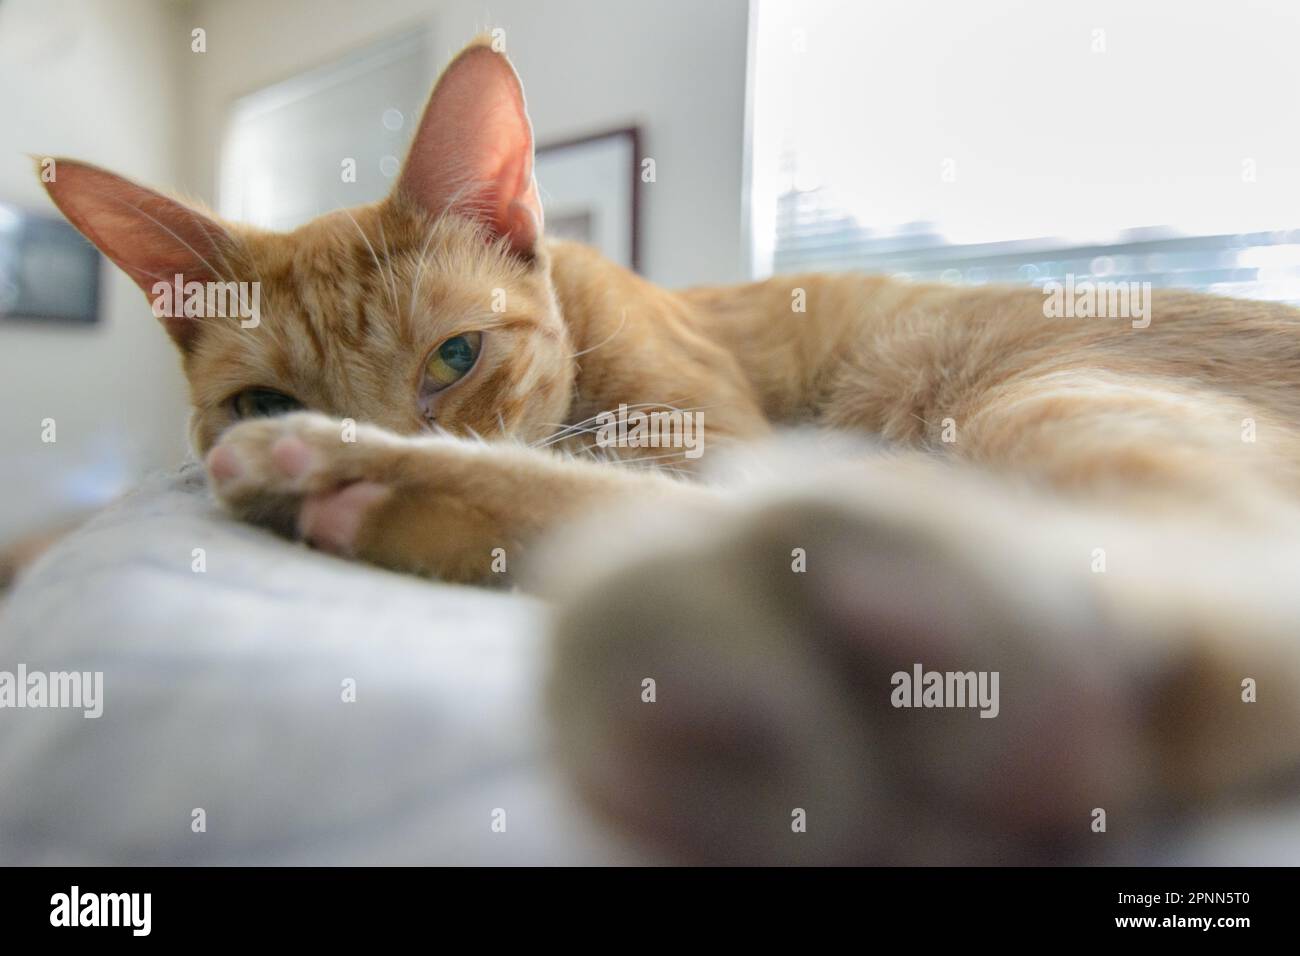 An orange tabby cat lies on a cushion in a sunny, white room and looks at the camera. Stock Photo